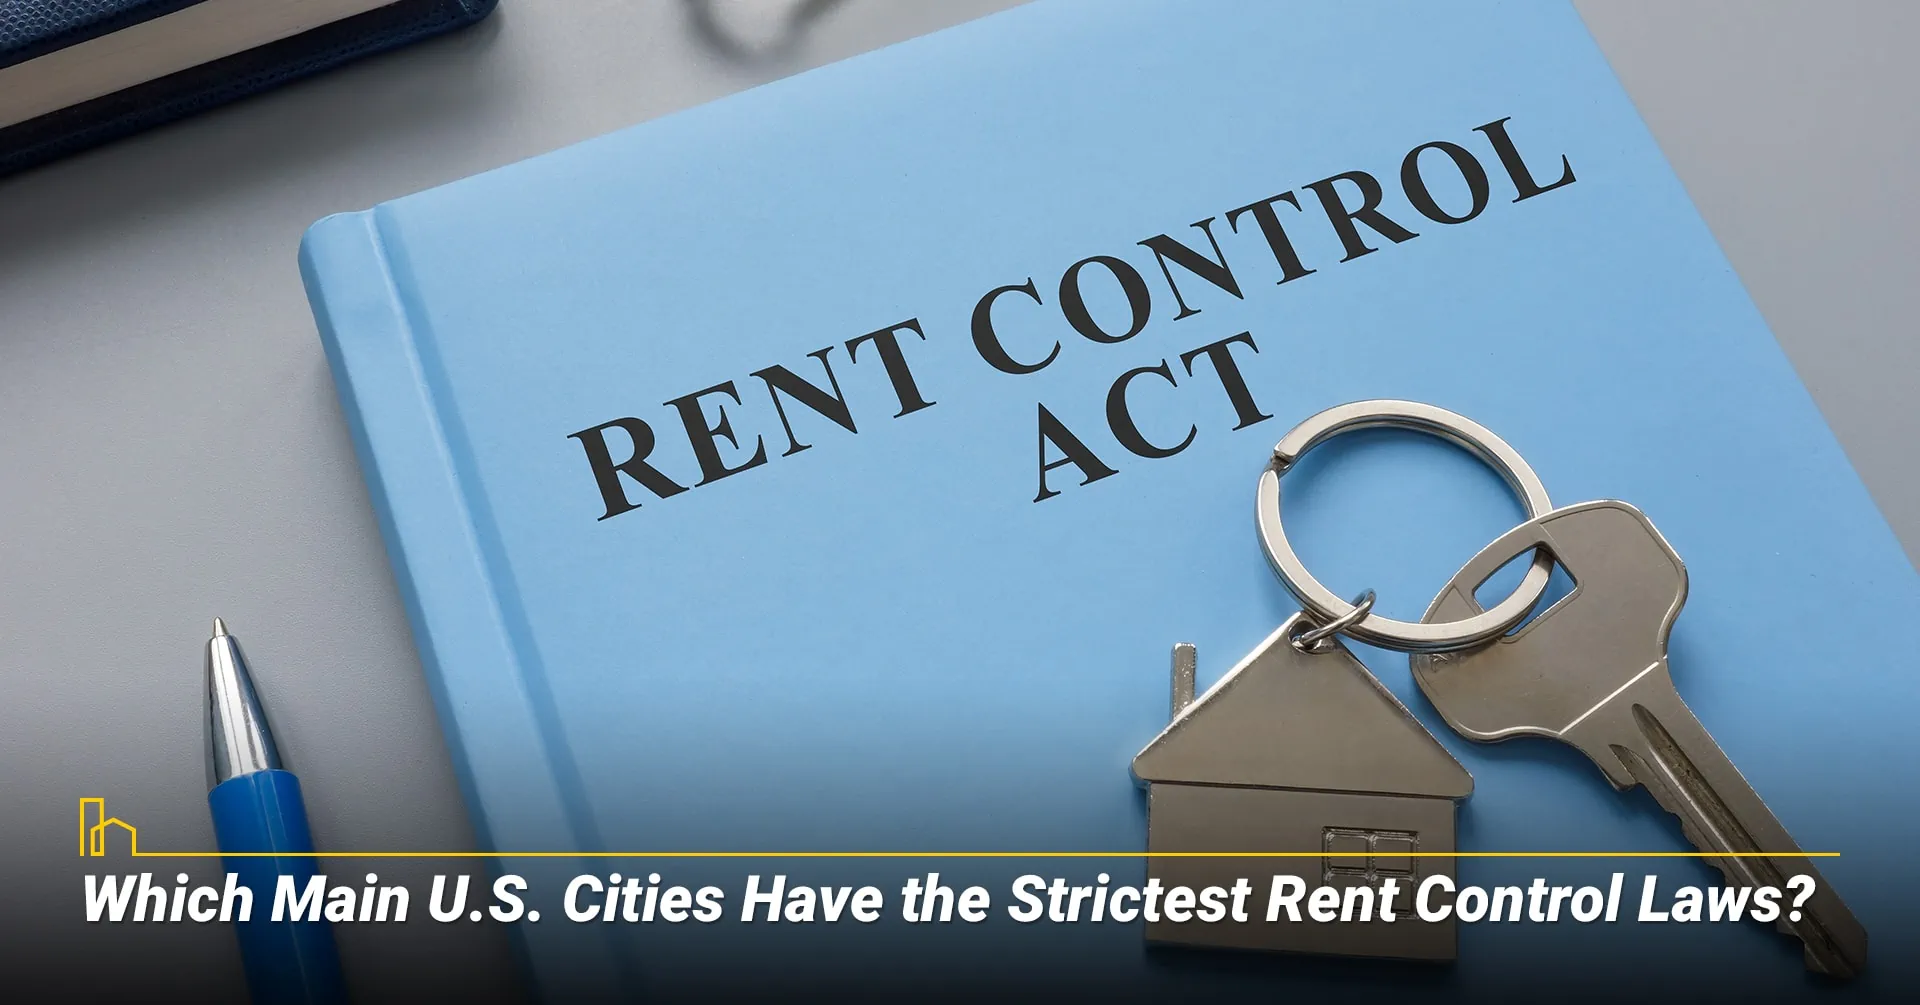 Which U.S. locations have rent control laws?